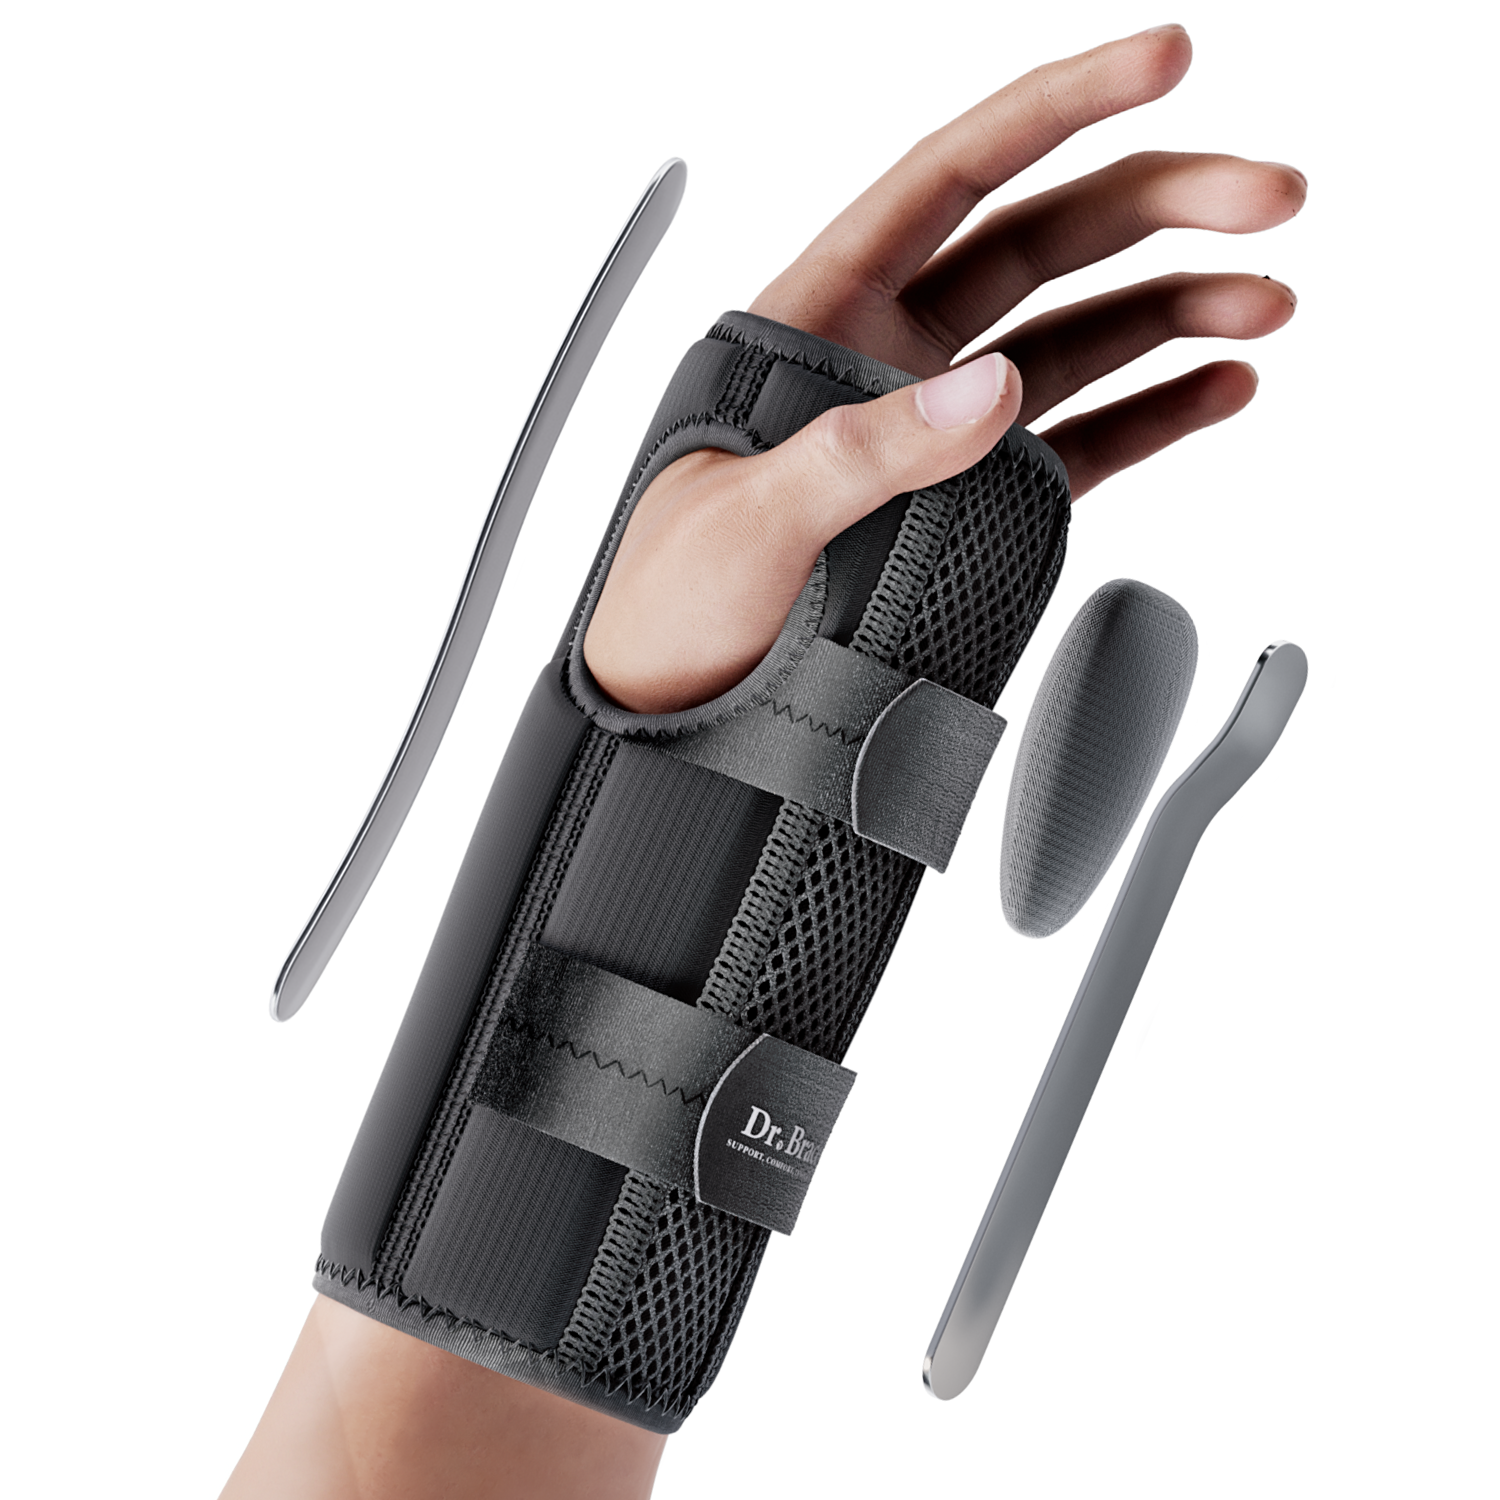 Adjustable Wrist Brace with Top and Bottom Splints & Therapeutic Cushi –  Dr. Brace